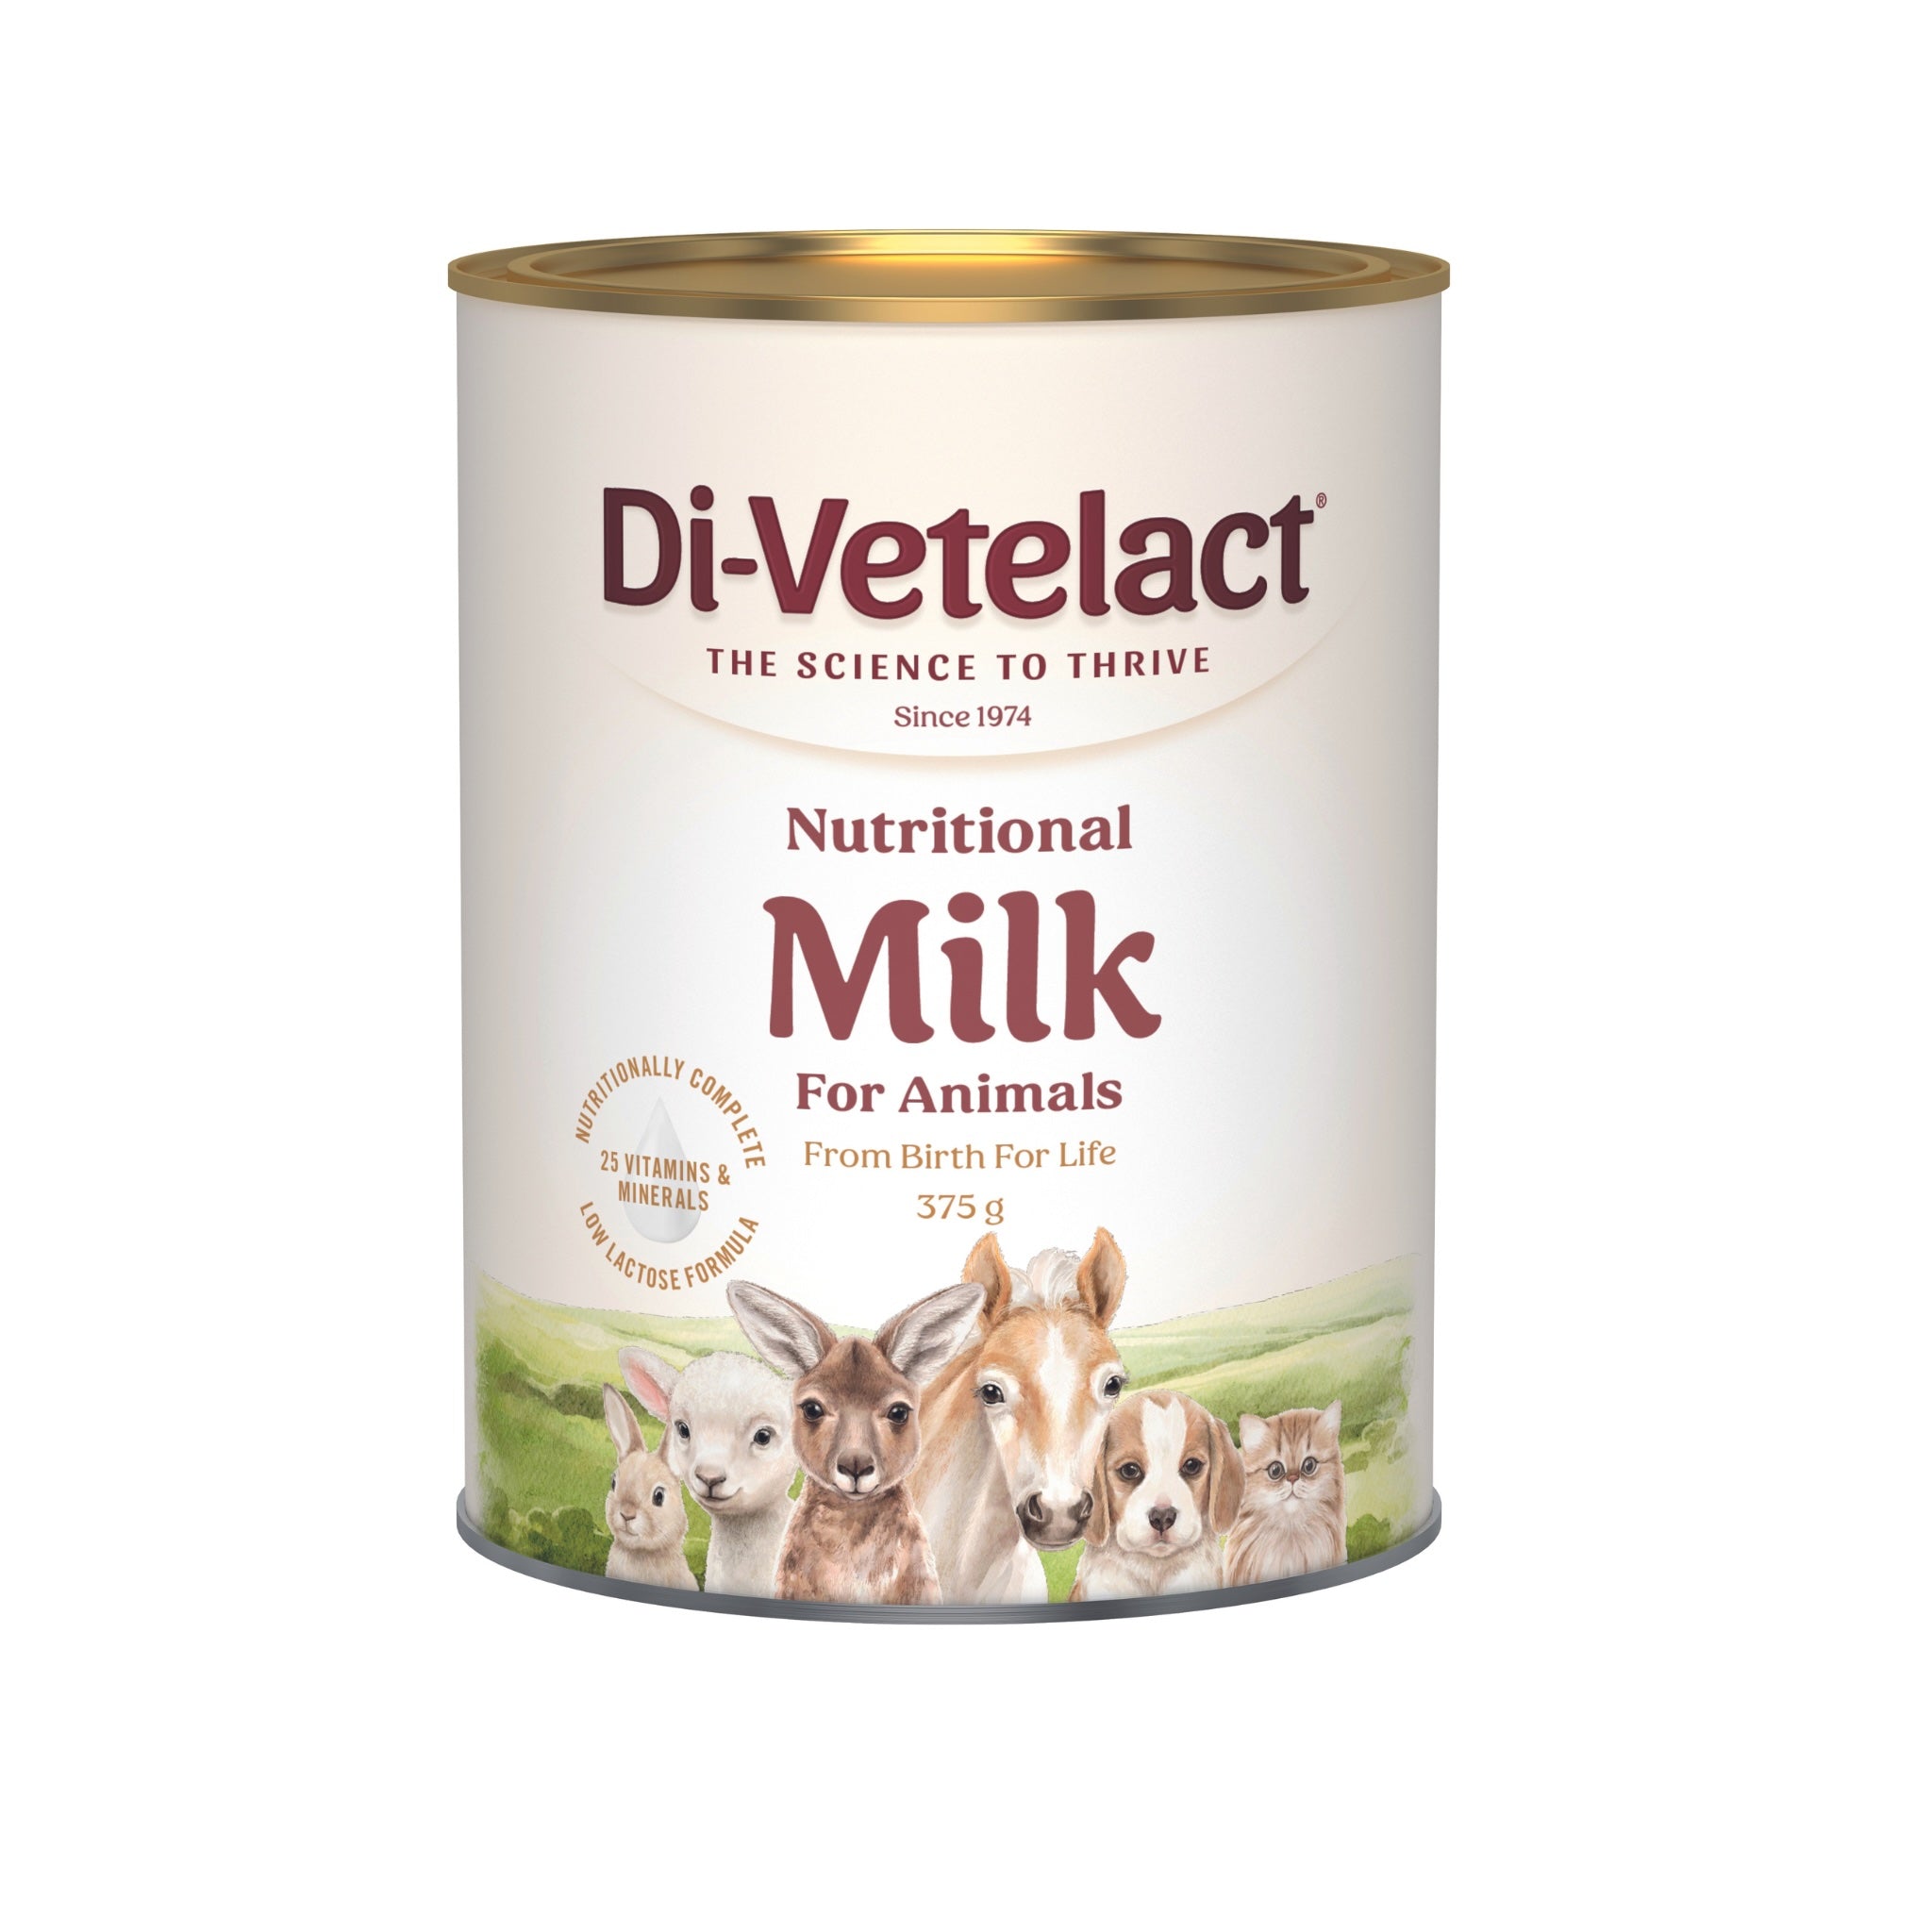 Nutritional Milk For Animals